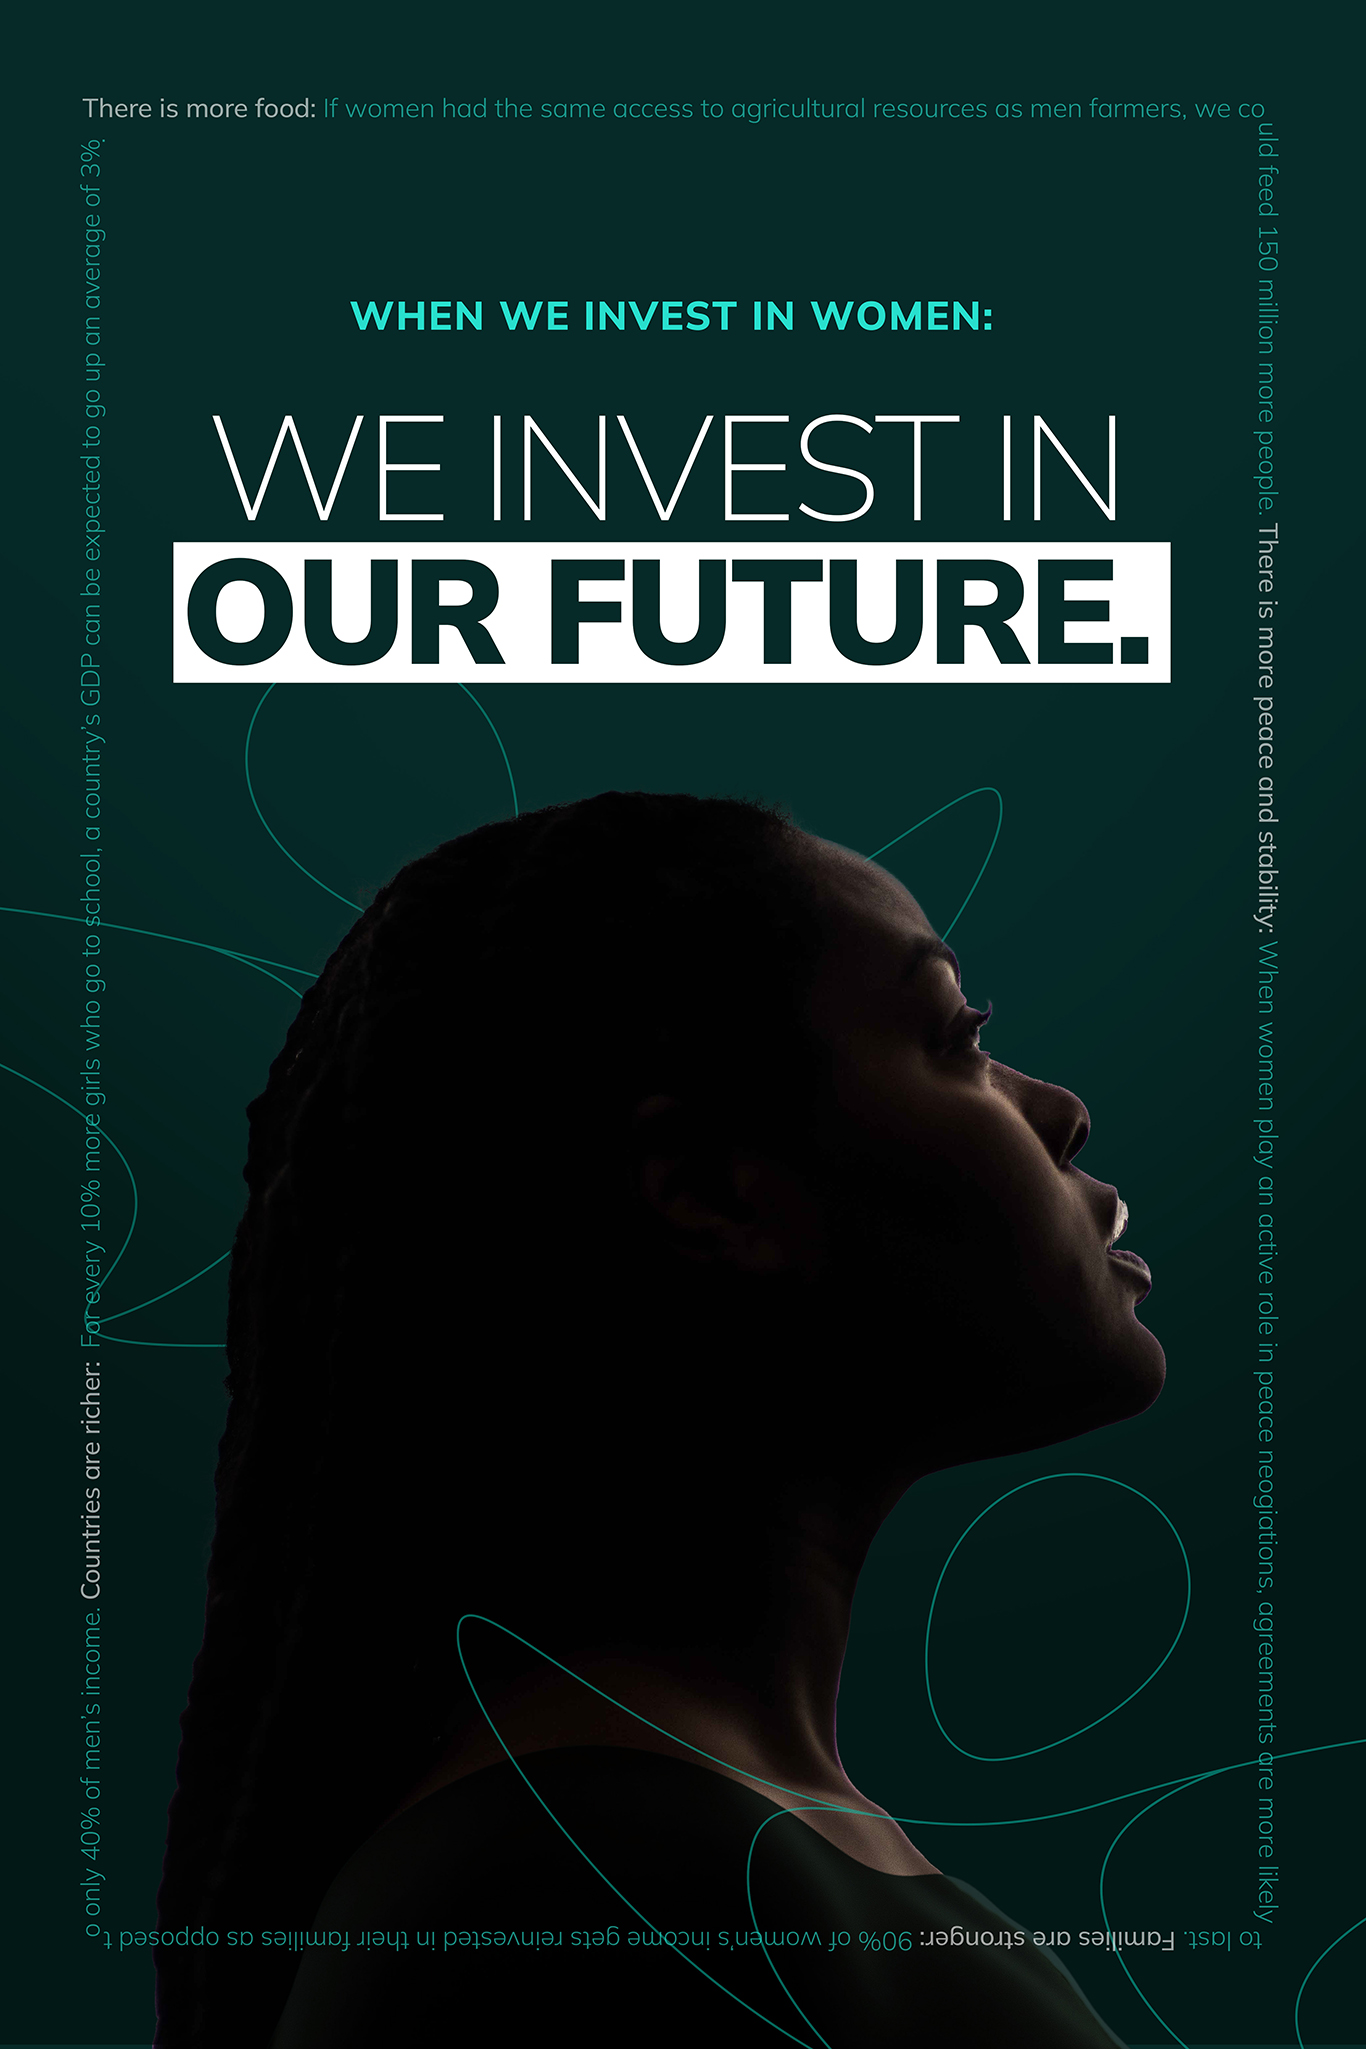 A dark green poster with light gray and green text creating a border around the perimeter and an image of a young Black woman looking off into the distance with green line drawings around her with teal and white text that reads “When we invest in women: we invest in our future”.